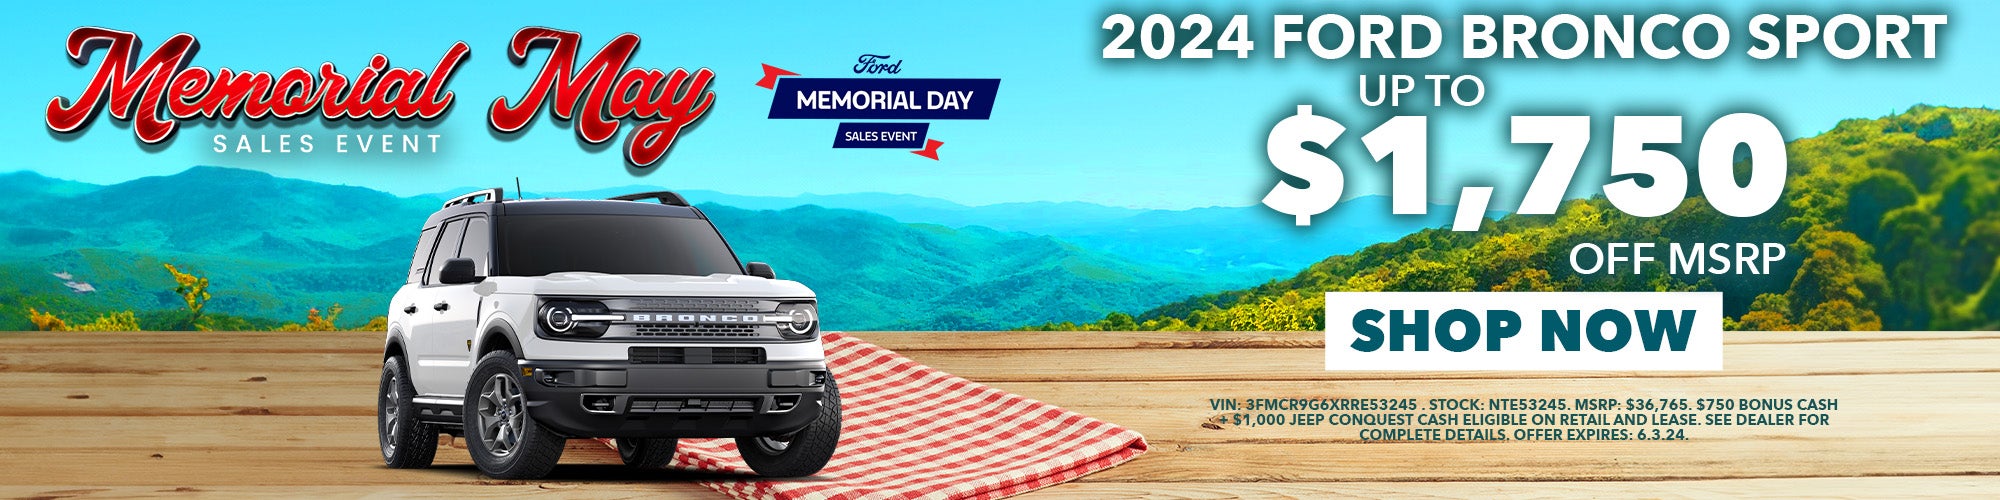 Up to $1,750 off MSRP on 2024 Bronco Sport